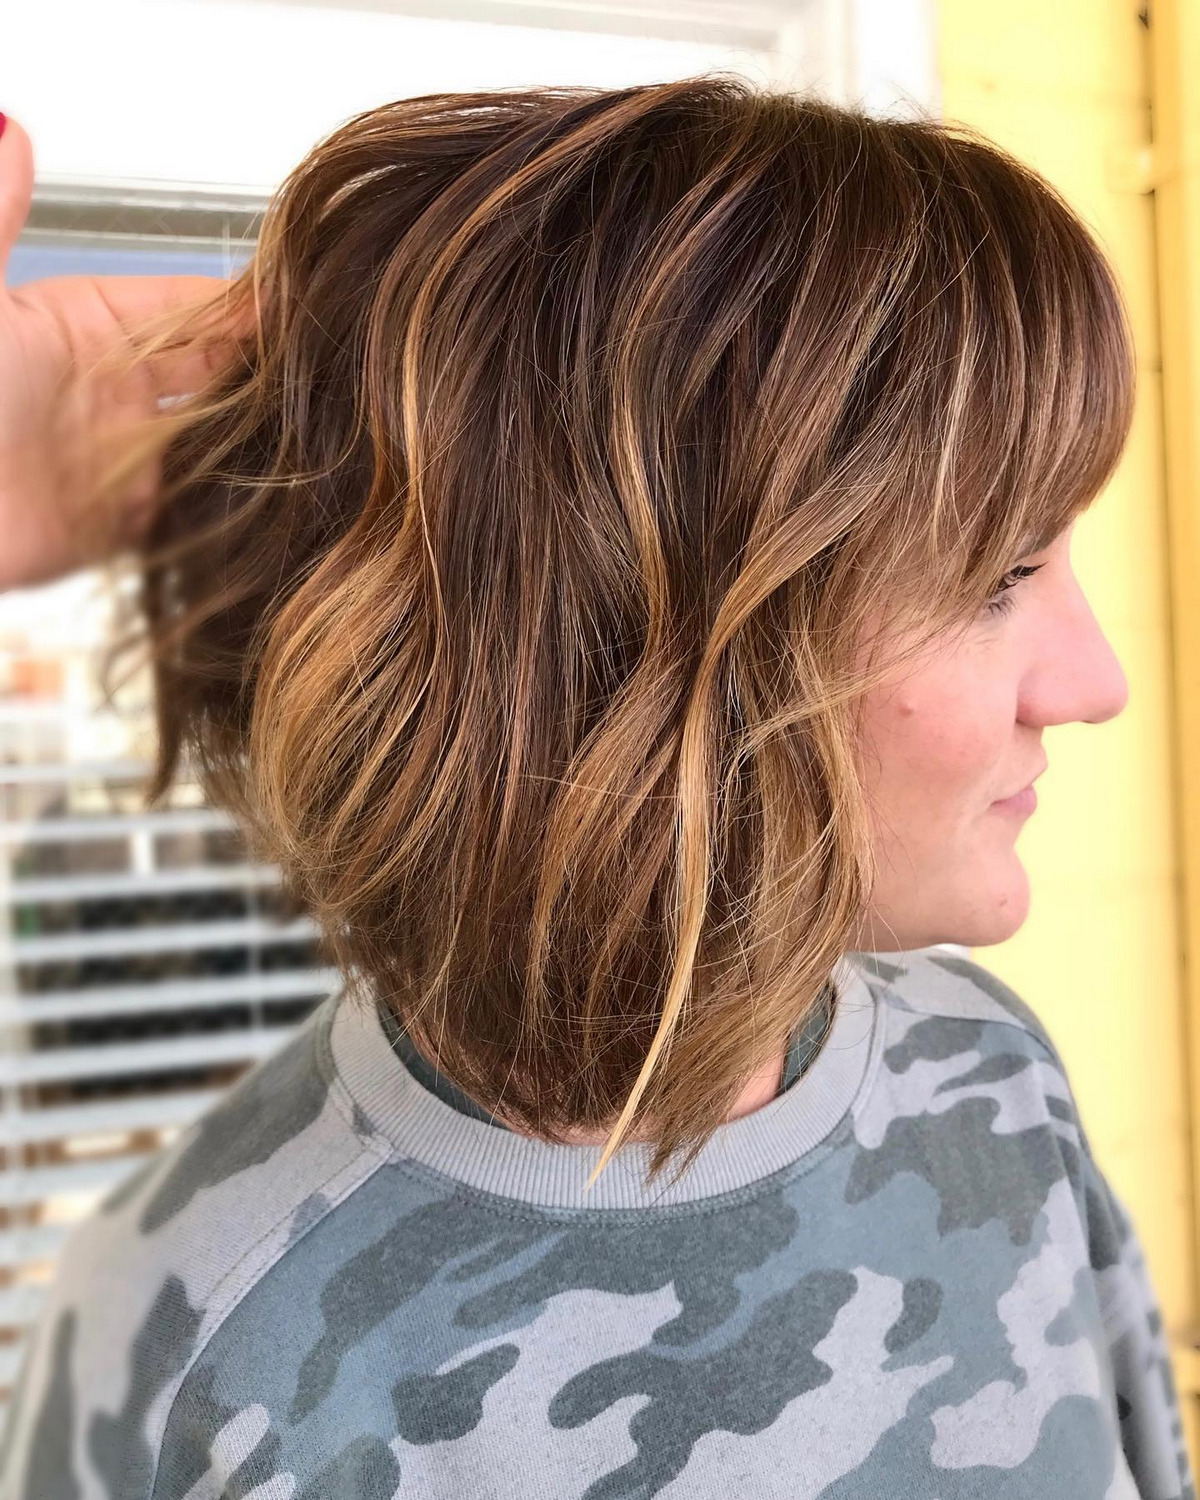 Tousled Bob With Highlights